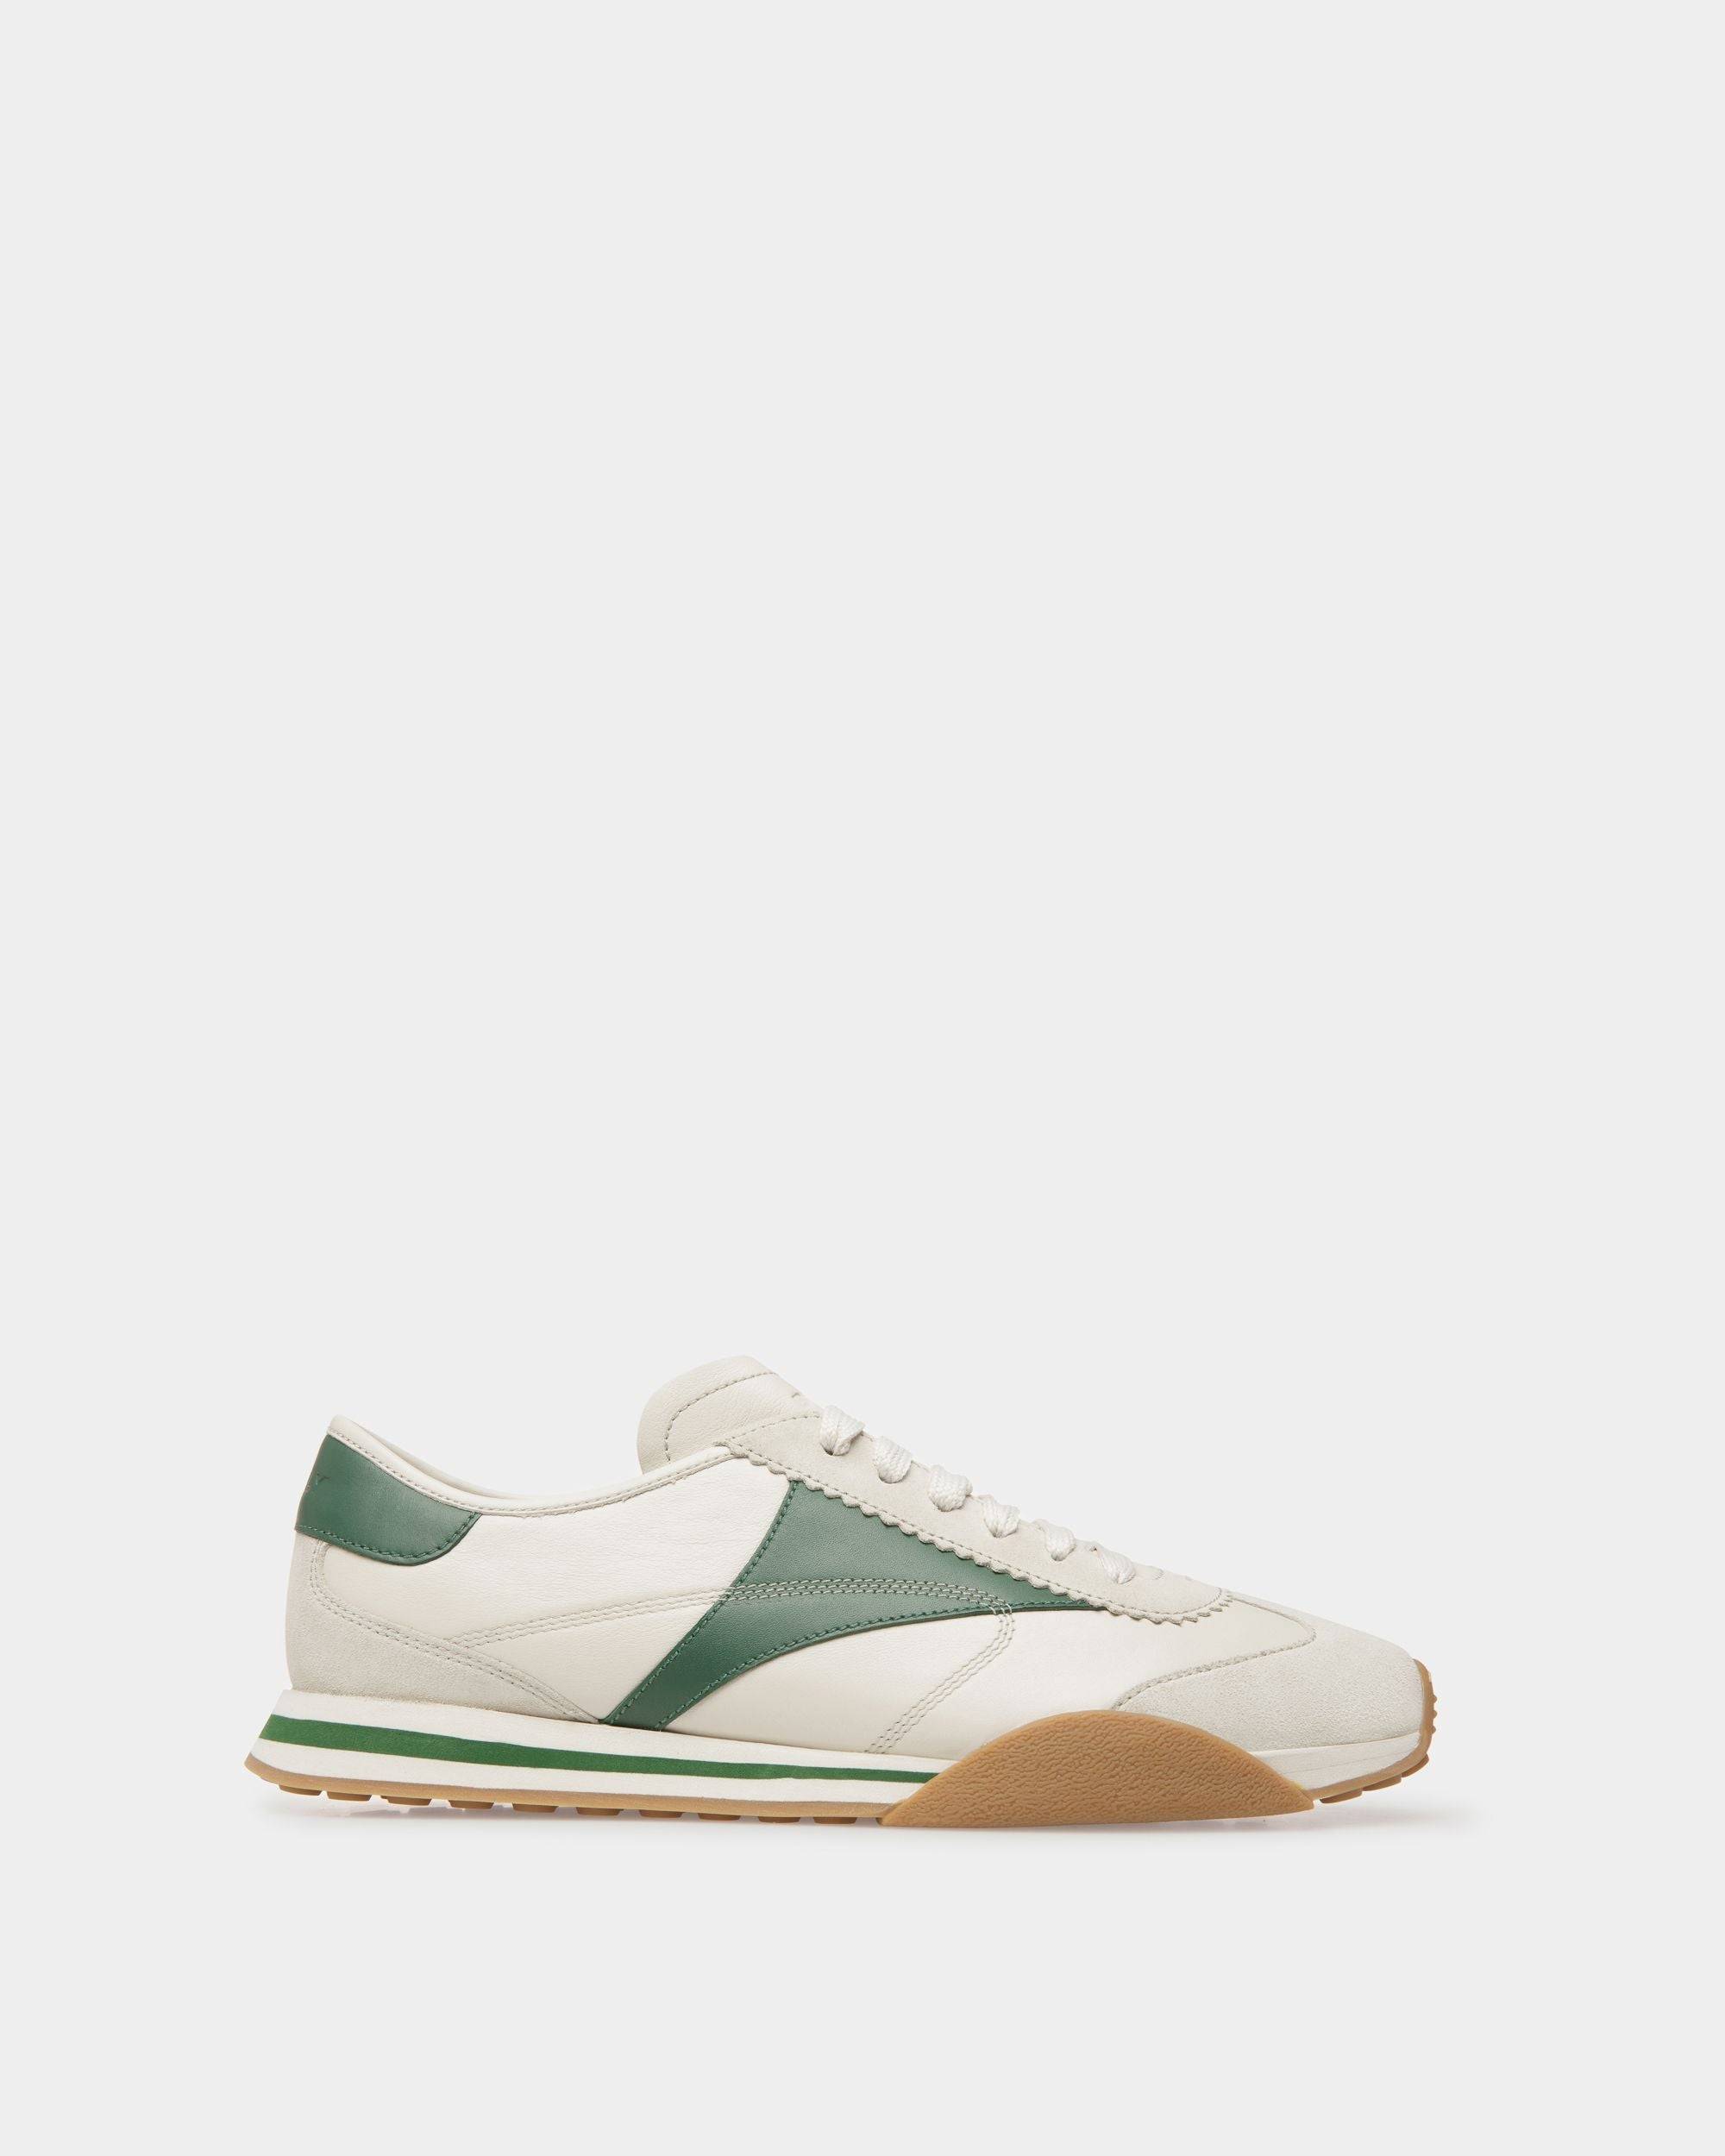 Men's Sussex Sneakers In Dusty White And Kelly Green Leather | Bally | Still Life Side